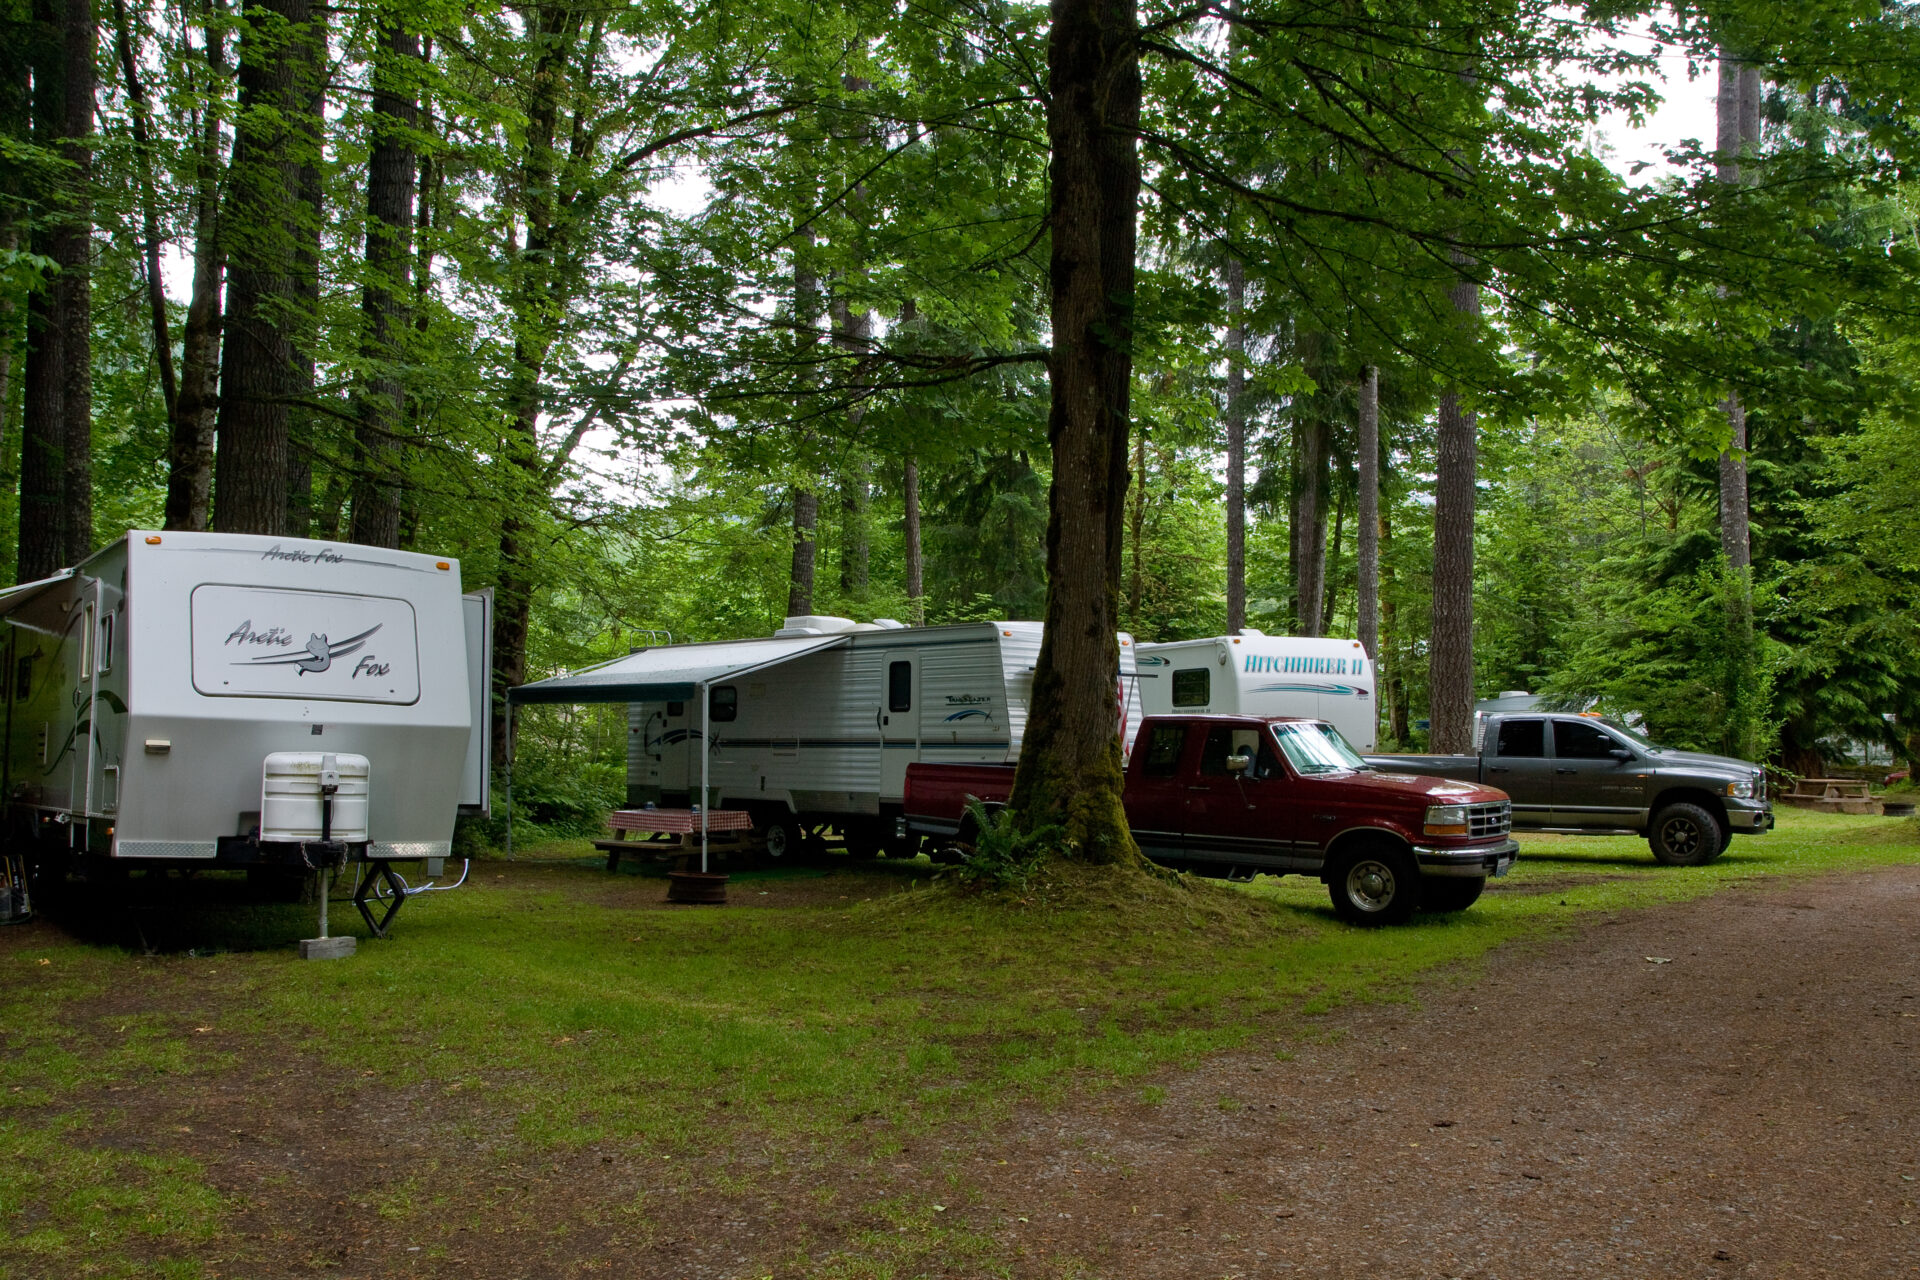 Tower Rock U-Fish R.V. Wooded RV Campground